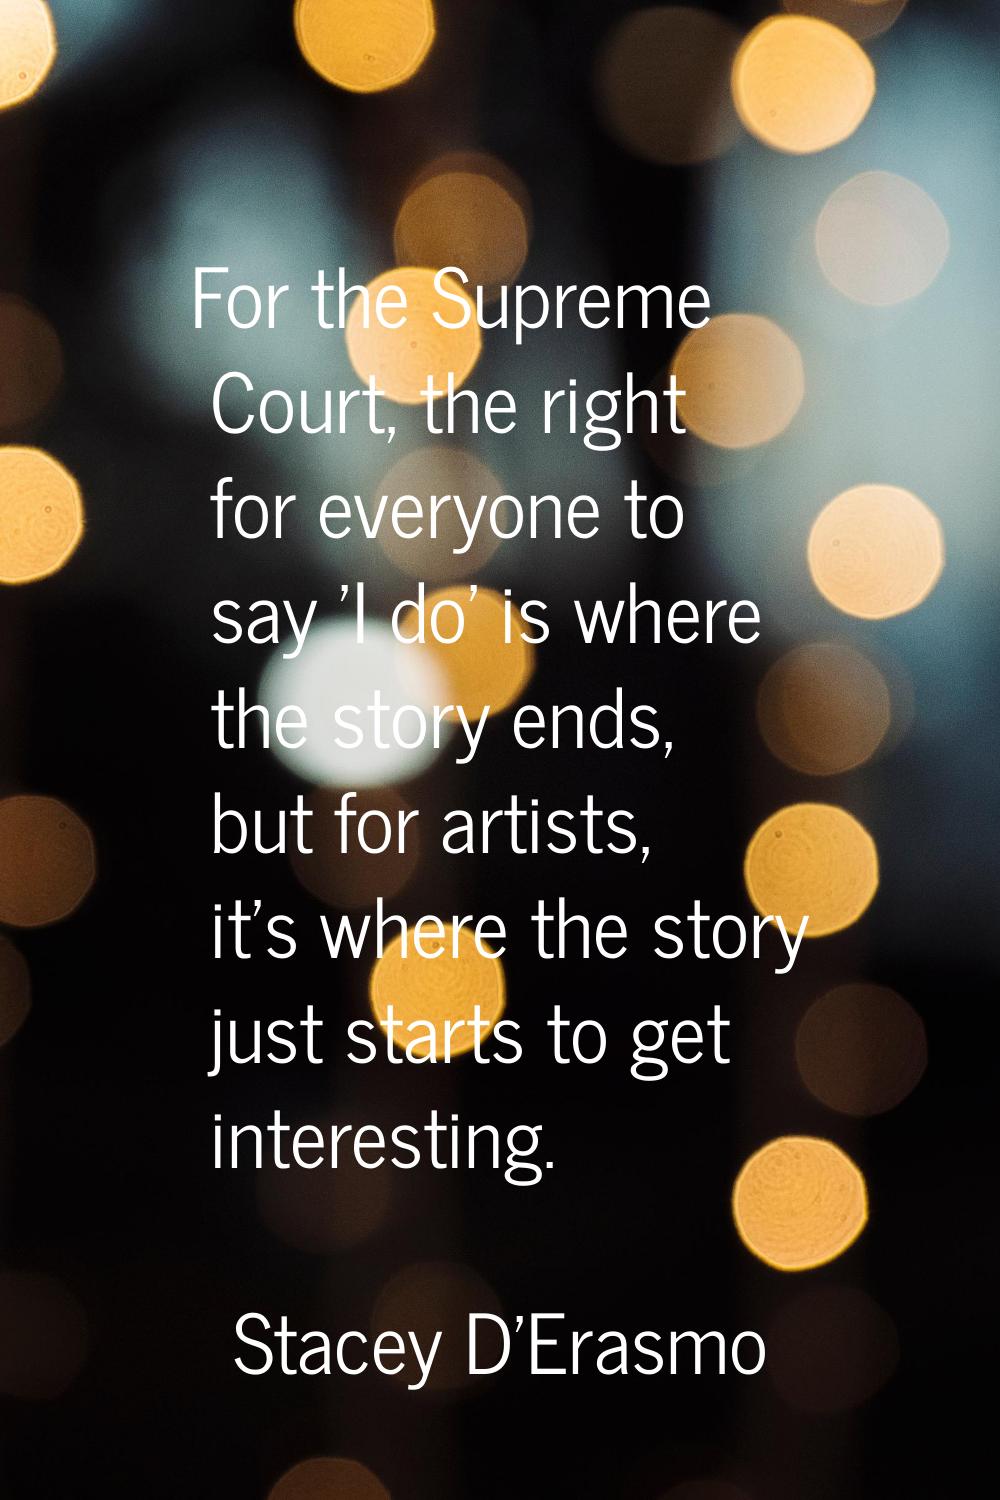 For the Supreme Court, the right for everyone to say 'I do' is where the story ends, but for artist